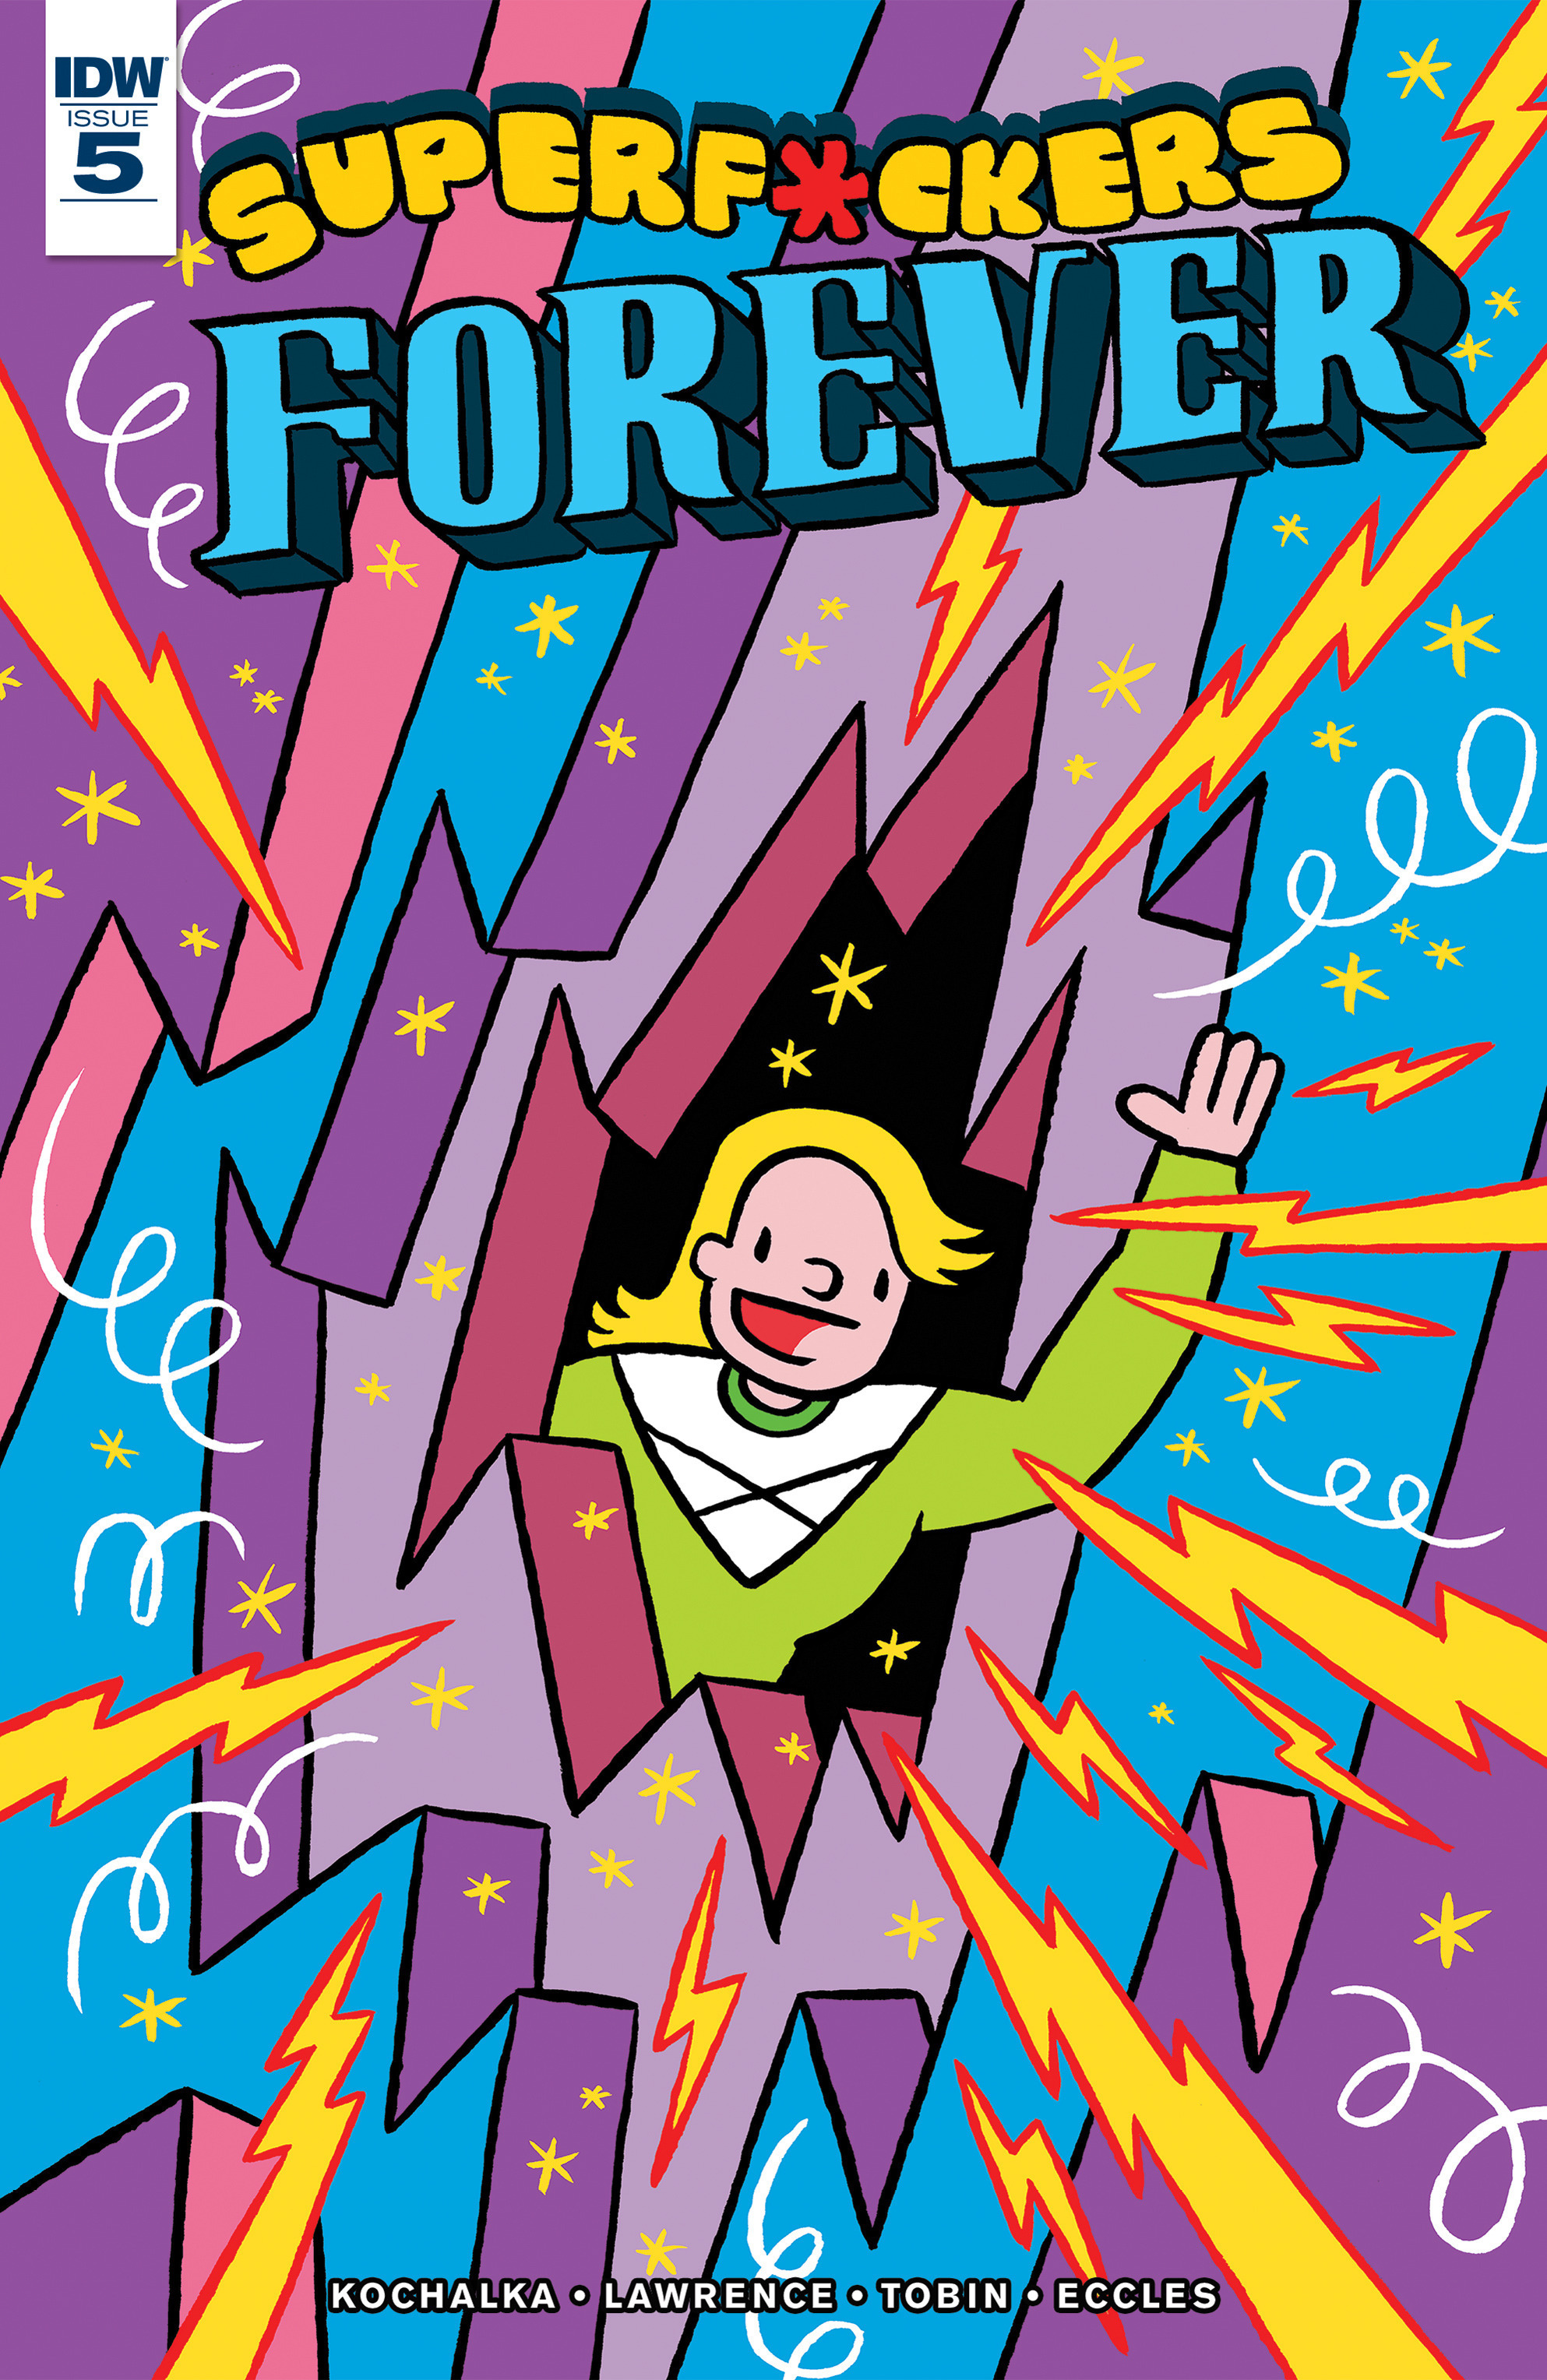 Read online Superf*ckers Forever comic -  Issue #5 - 1